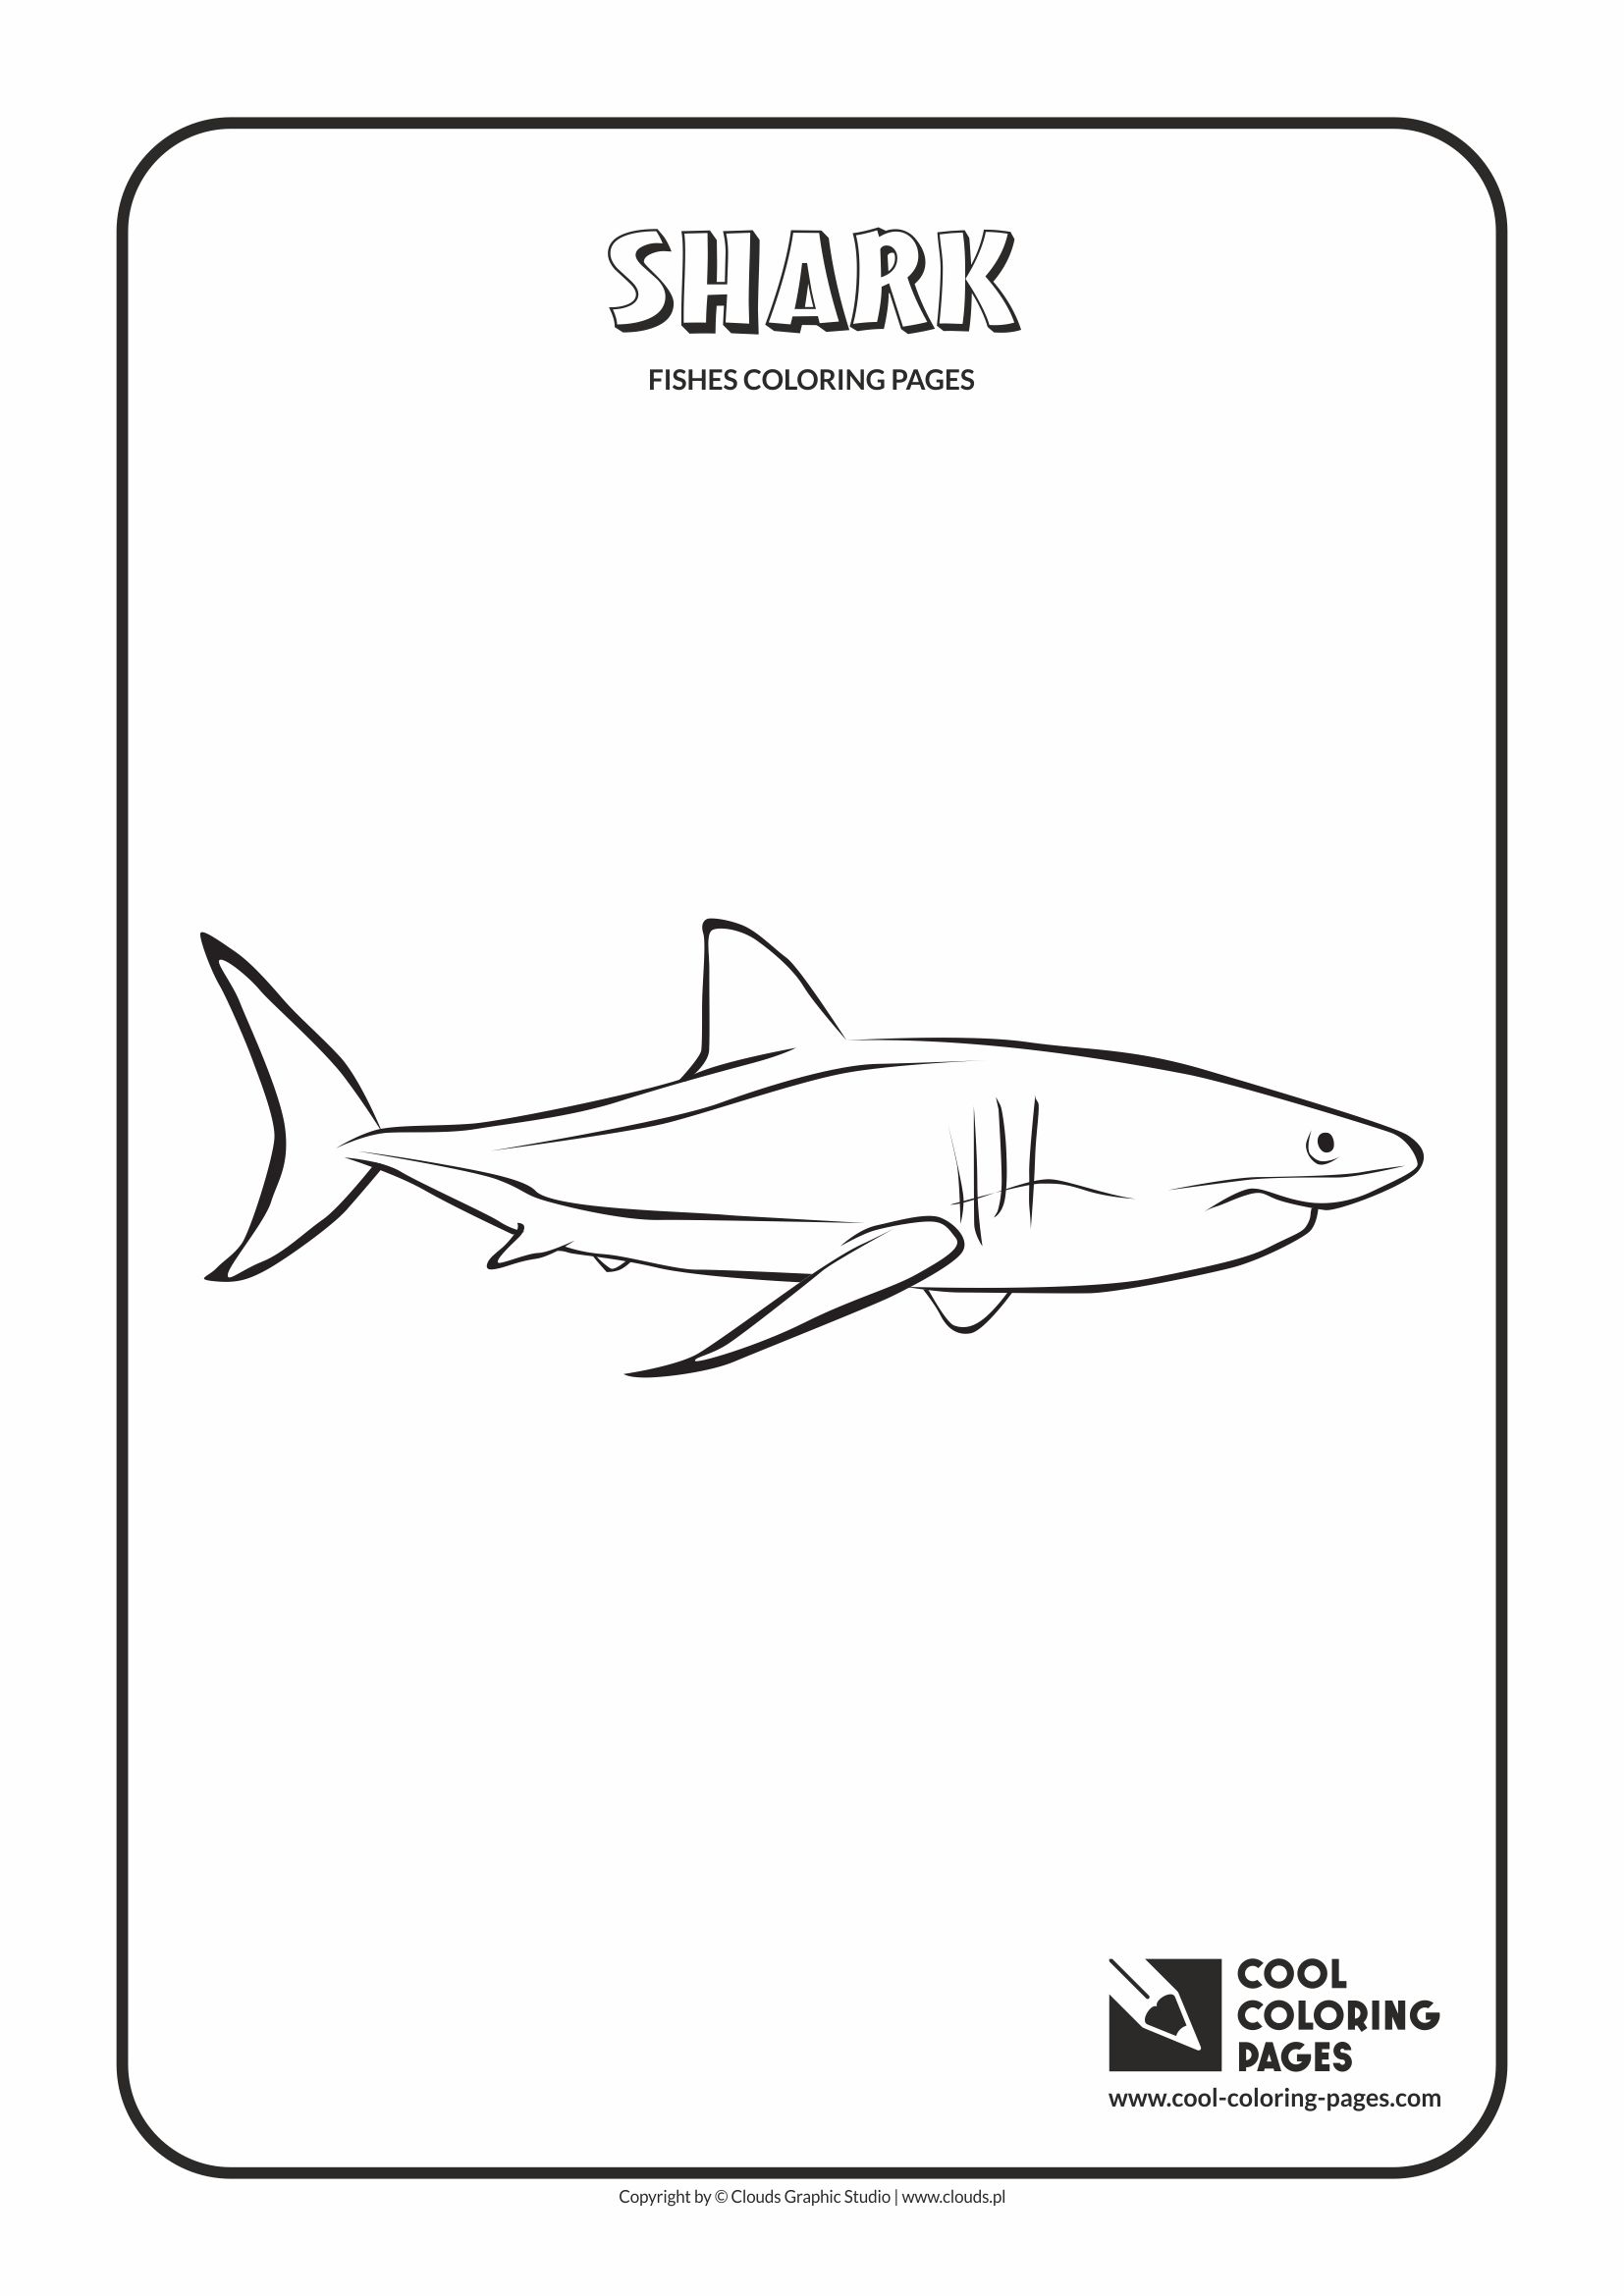 Cool Coloring Pages - Animals / Shark / Coloring page with shark